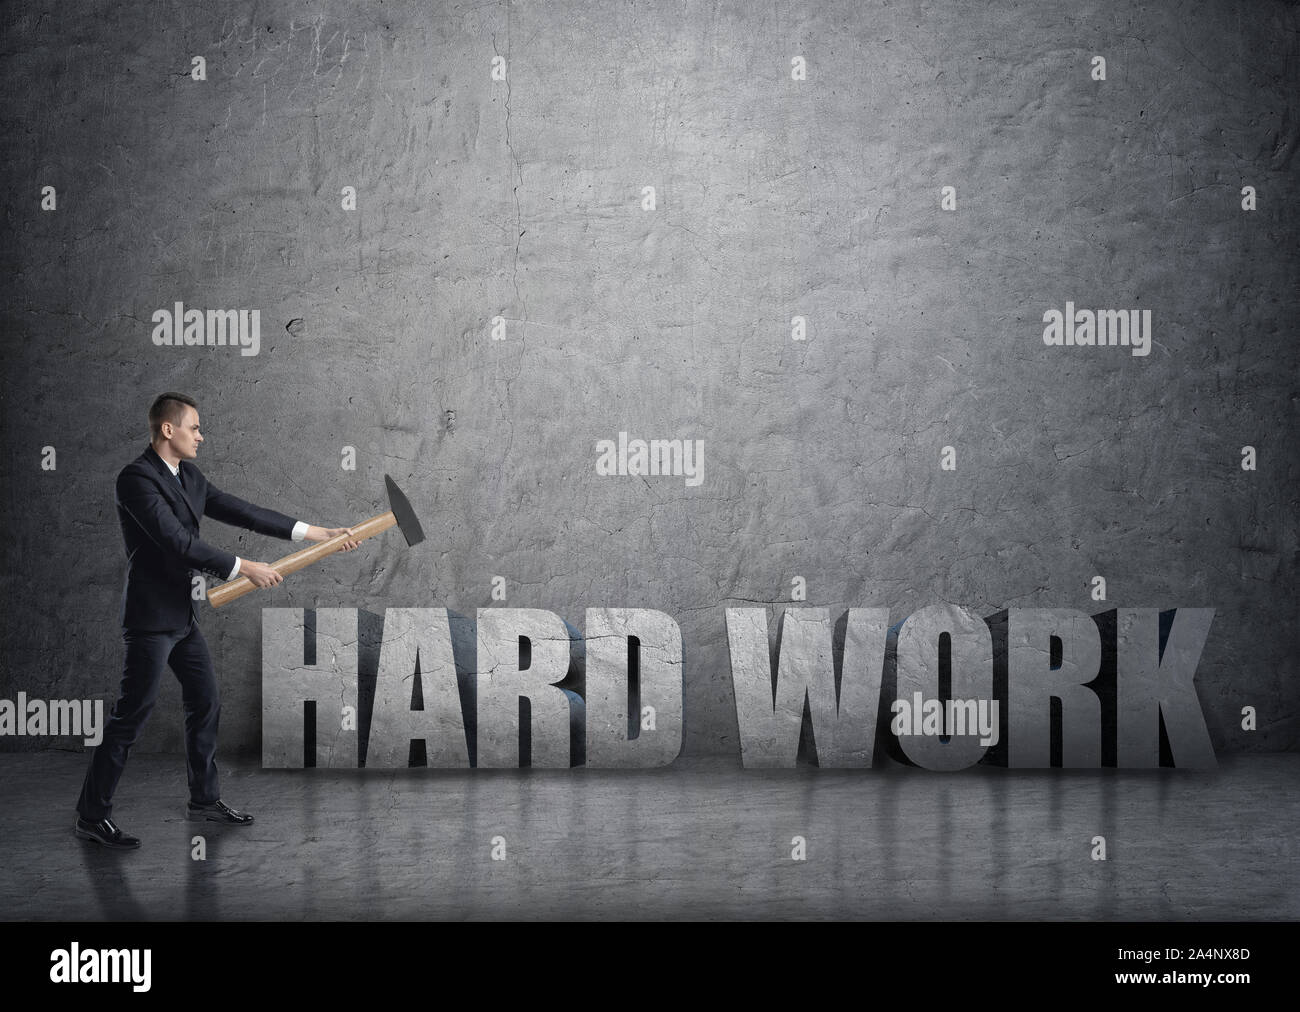 Side view of young businessman crashing 3D concrete 'hard work' words with a hammer Stock Photo